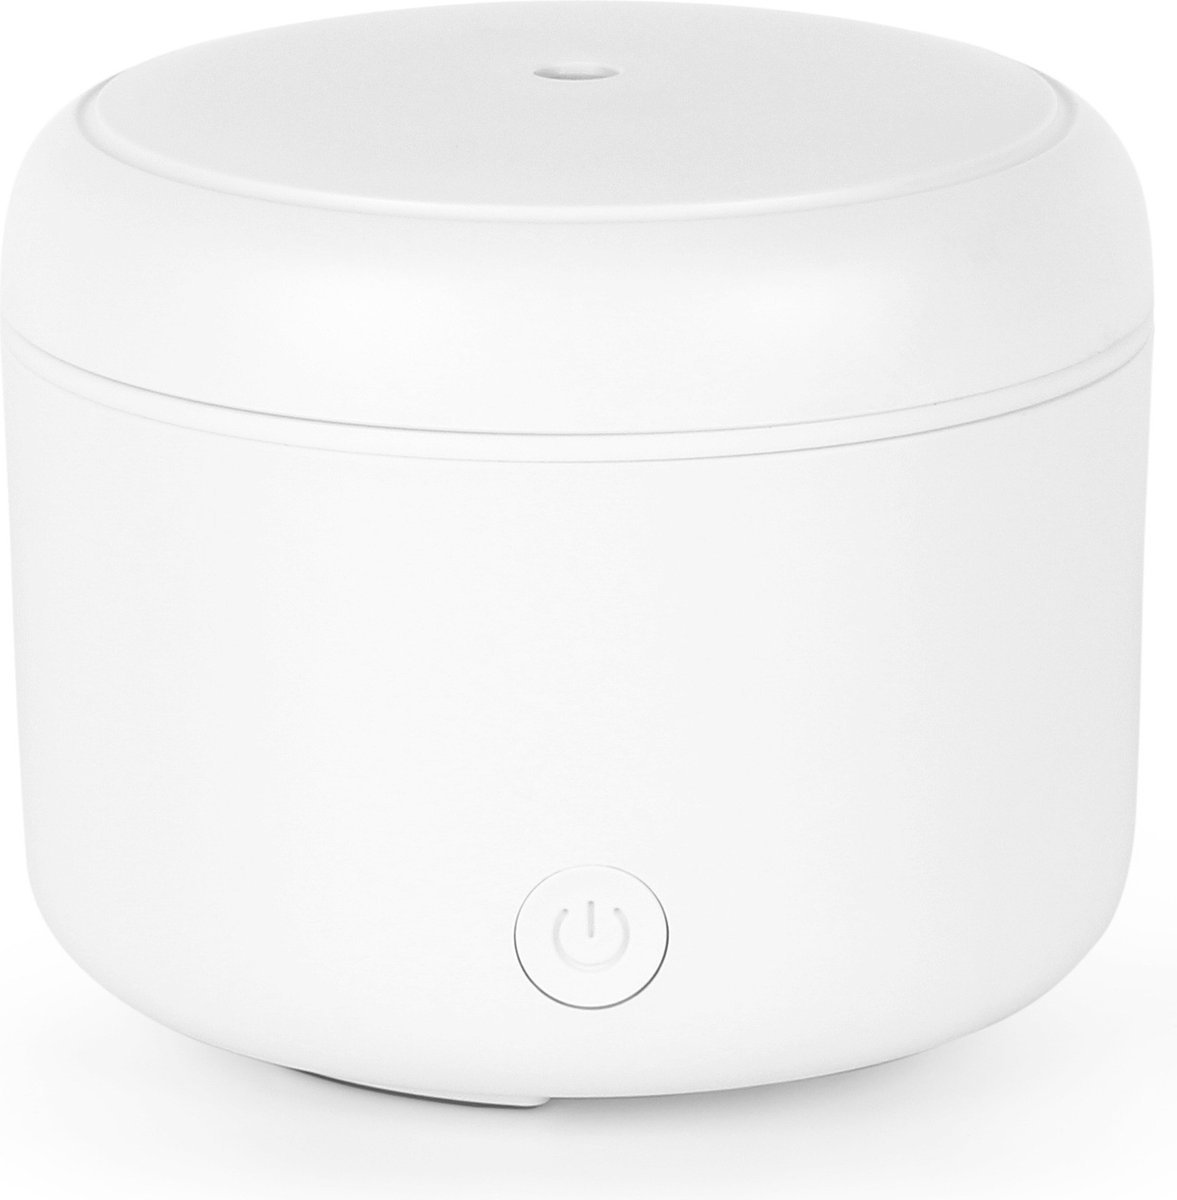 Airbi CANDY arom diffuser